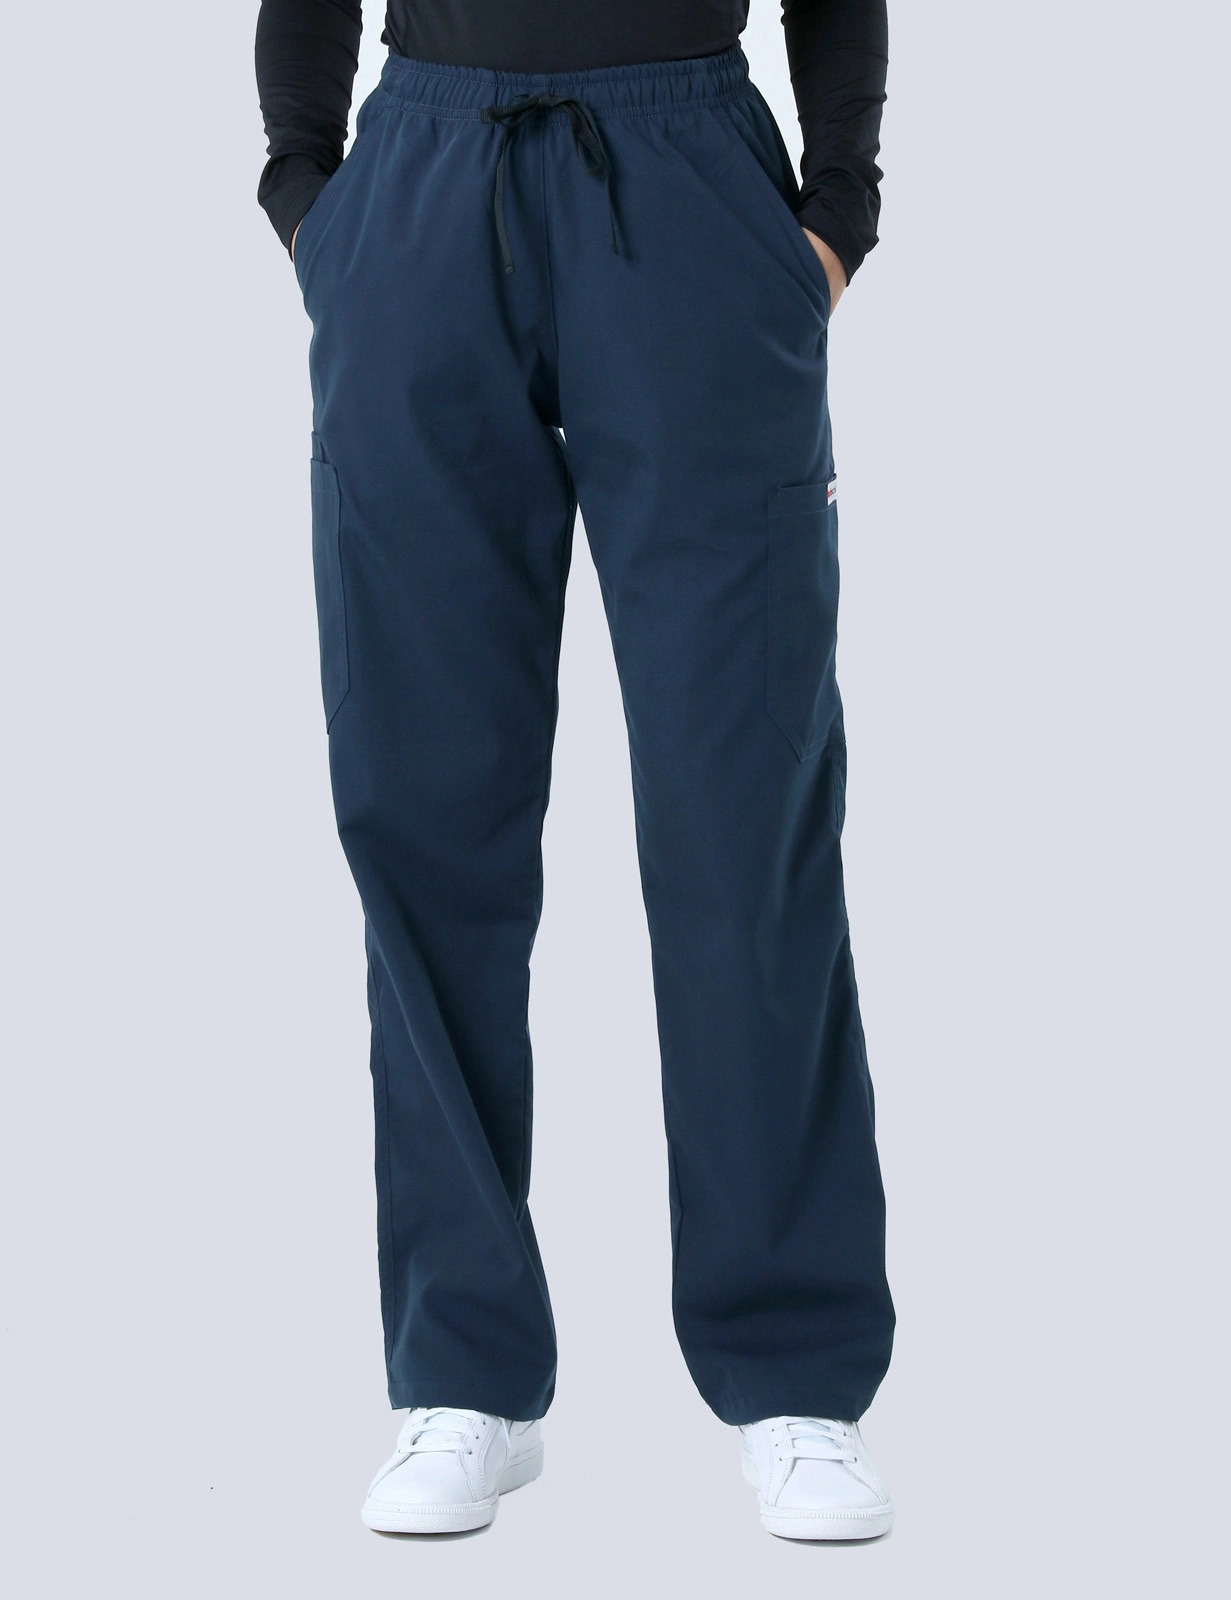 KnG Healthcare - Navy Cargo Pant